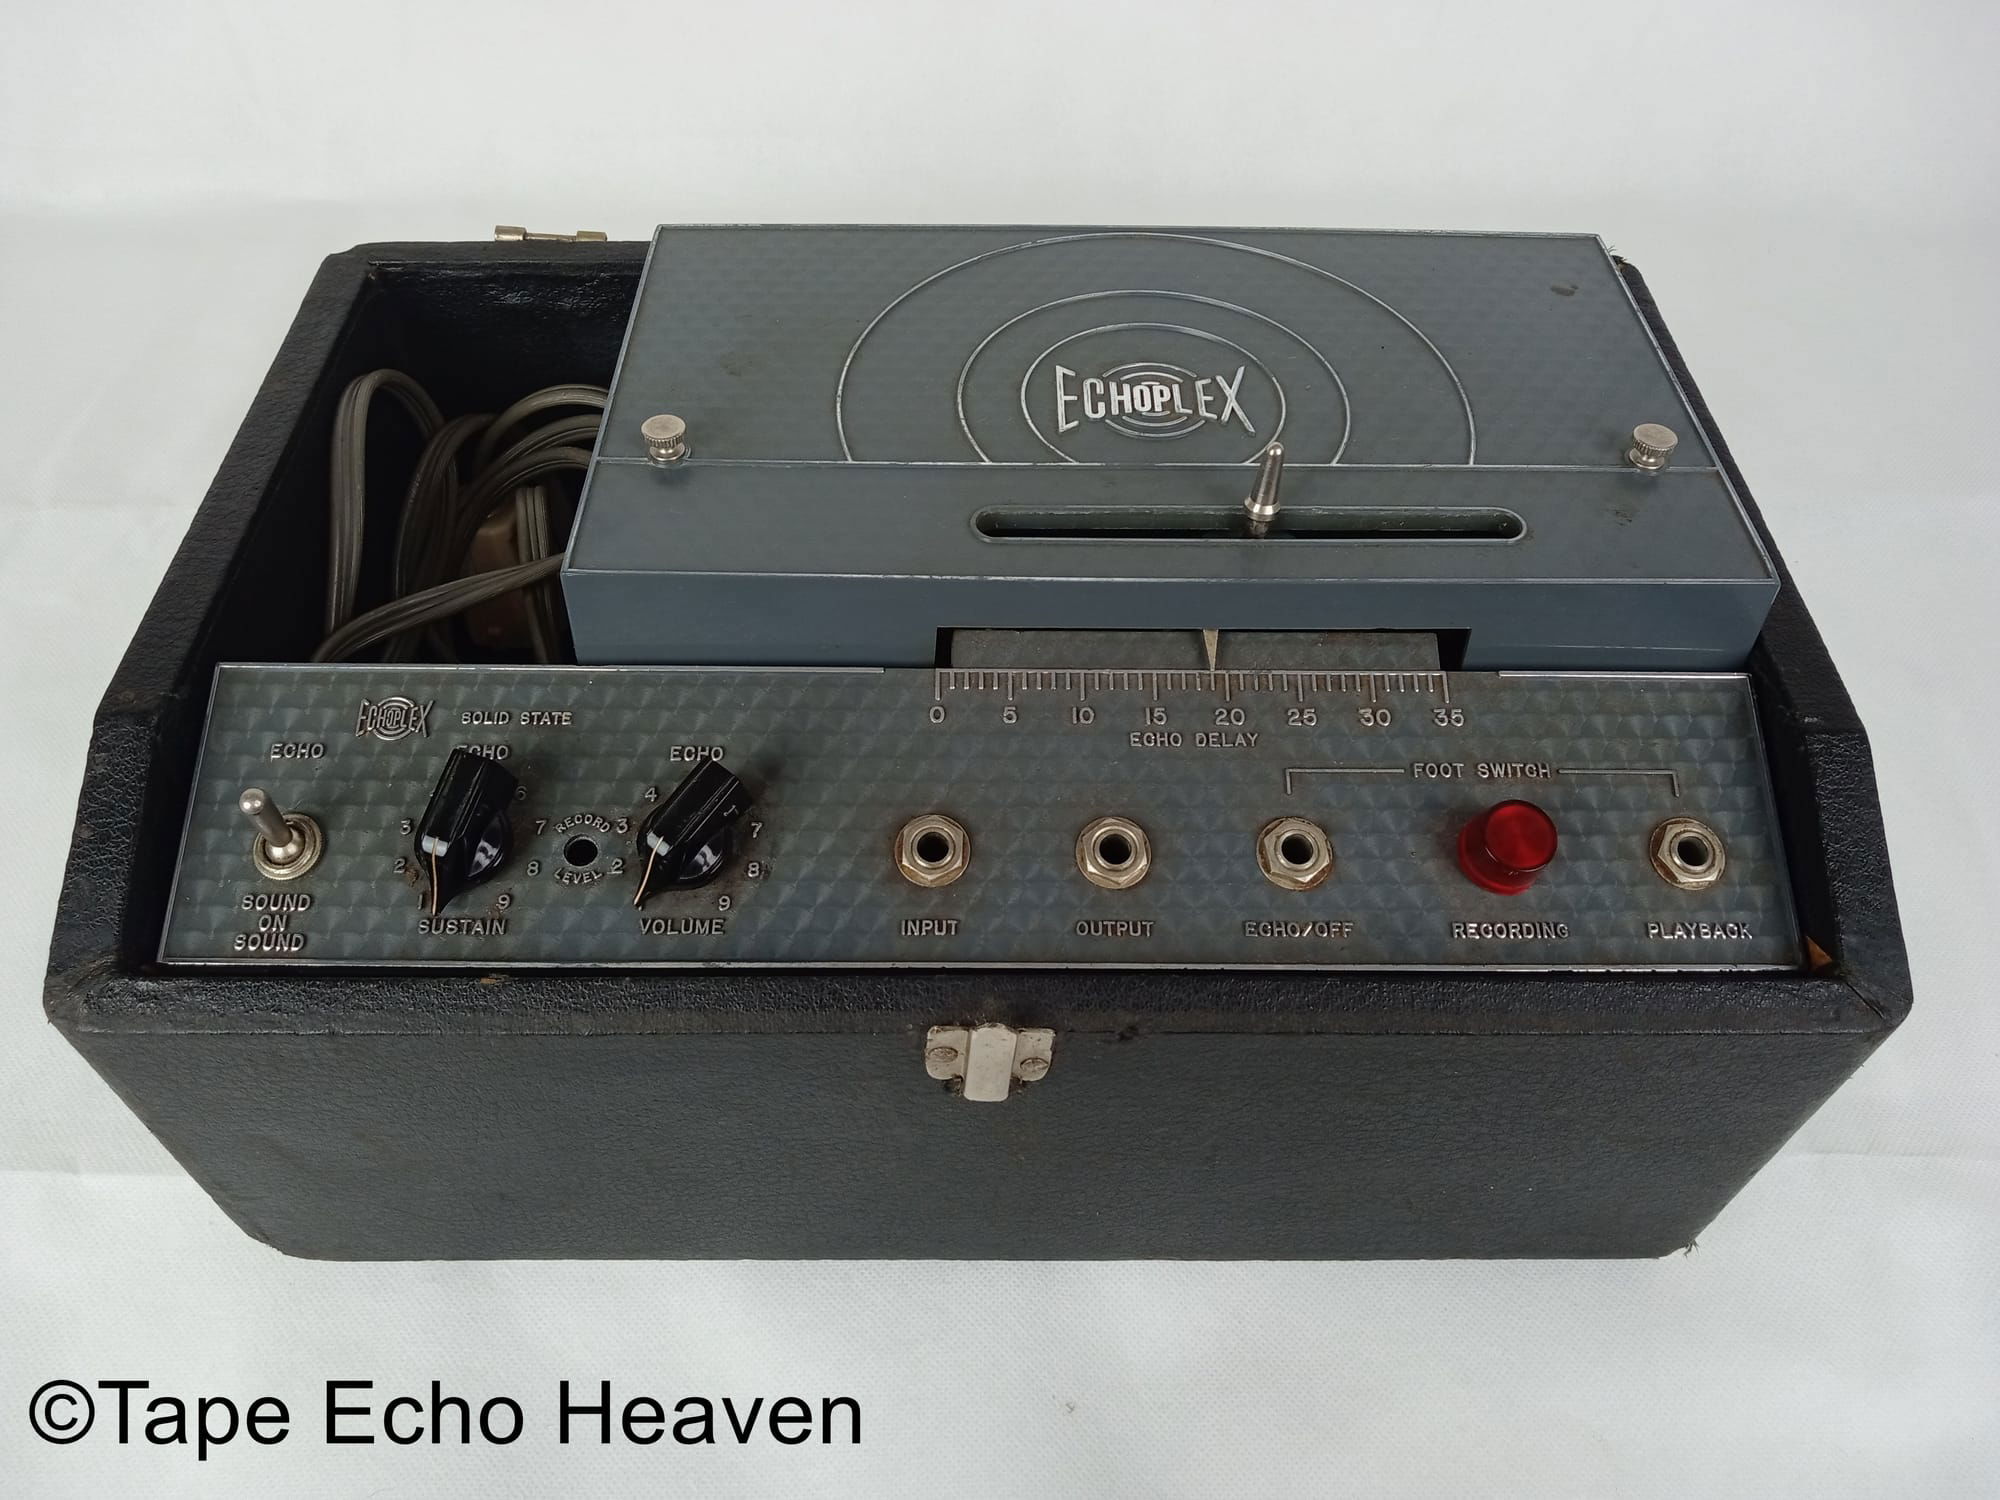 Echoplex EP3 the famous tape echo from the USA